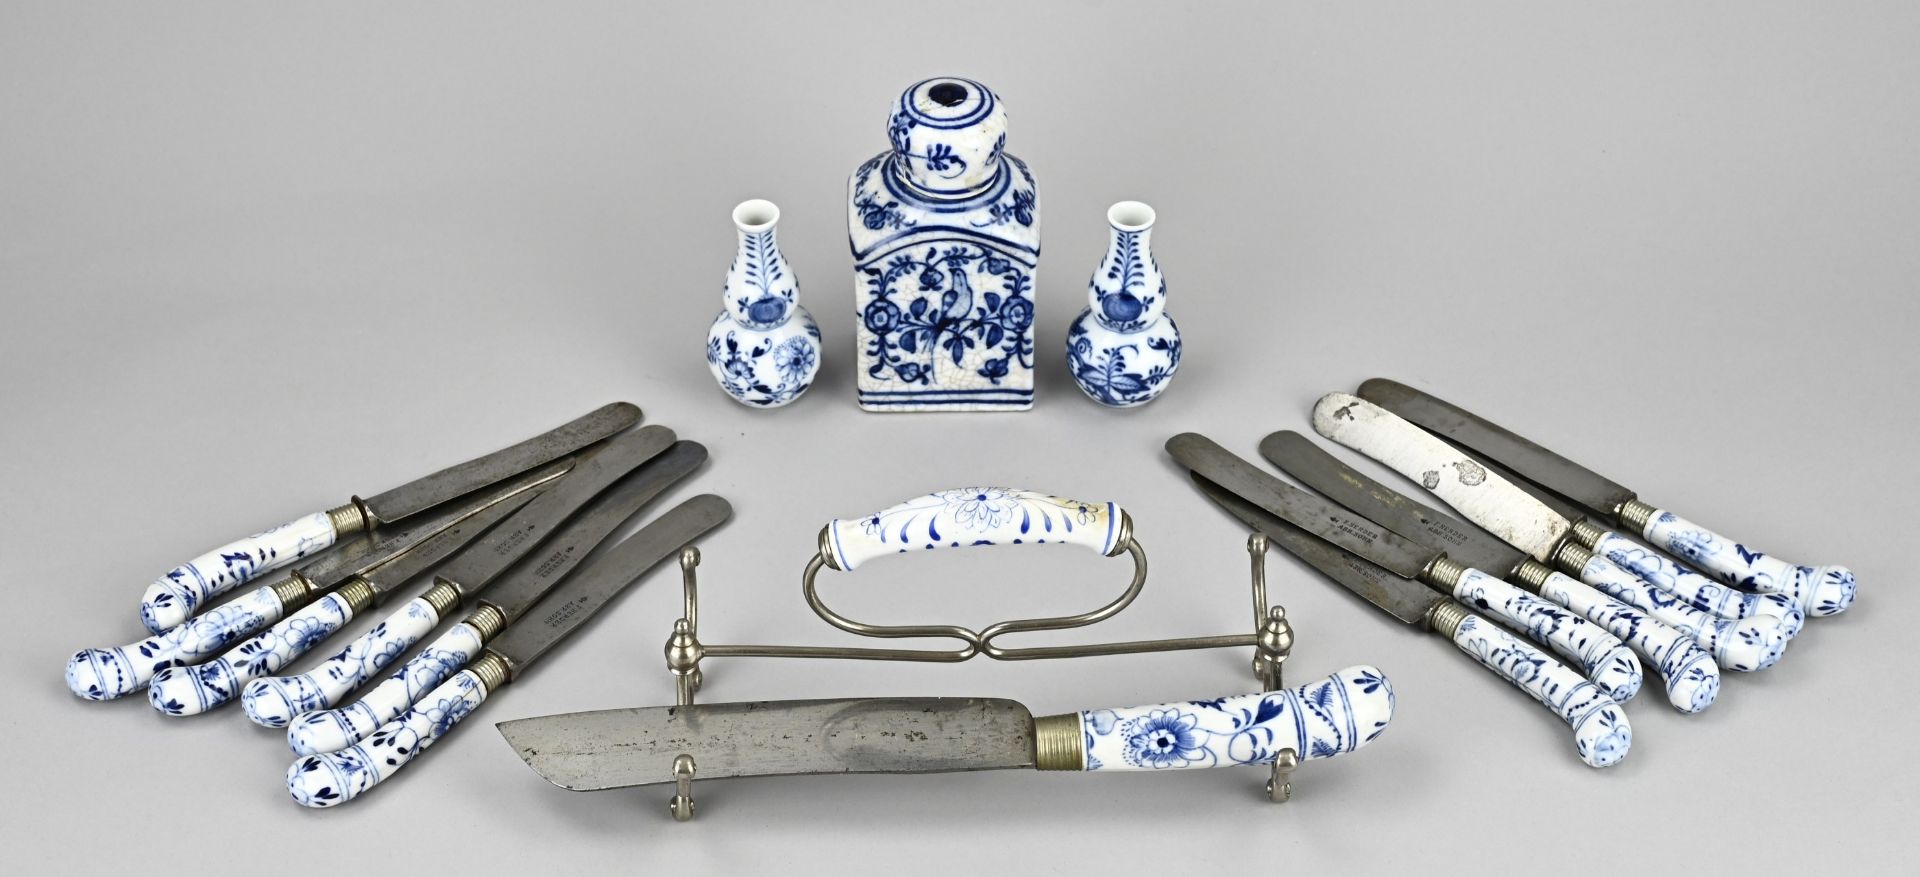 Zwiebelmuster knives and tea caddy